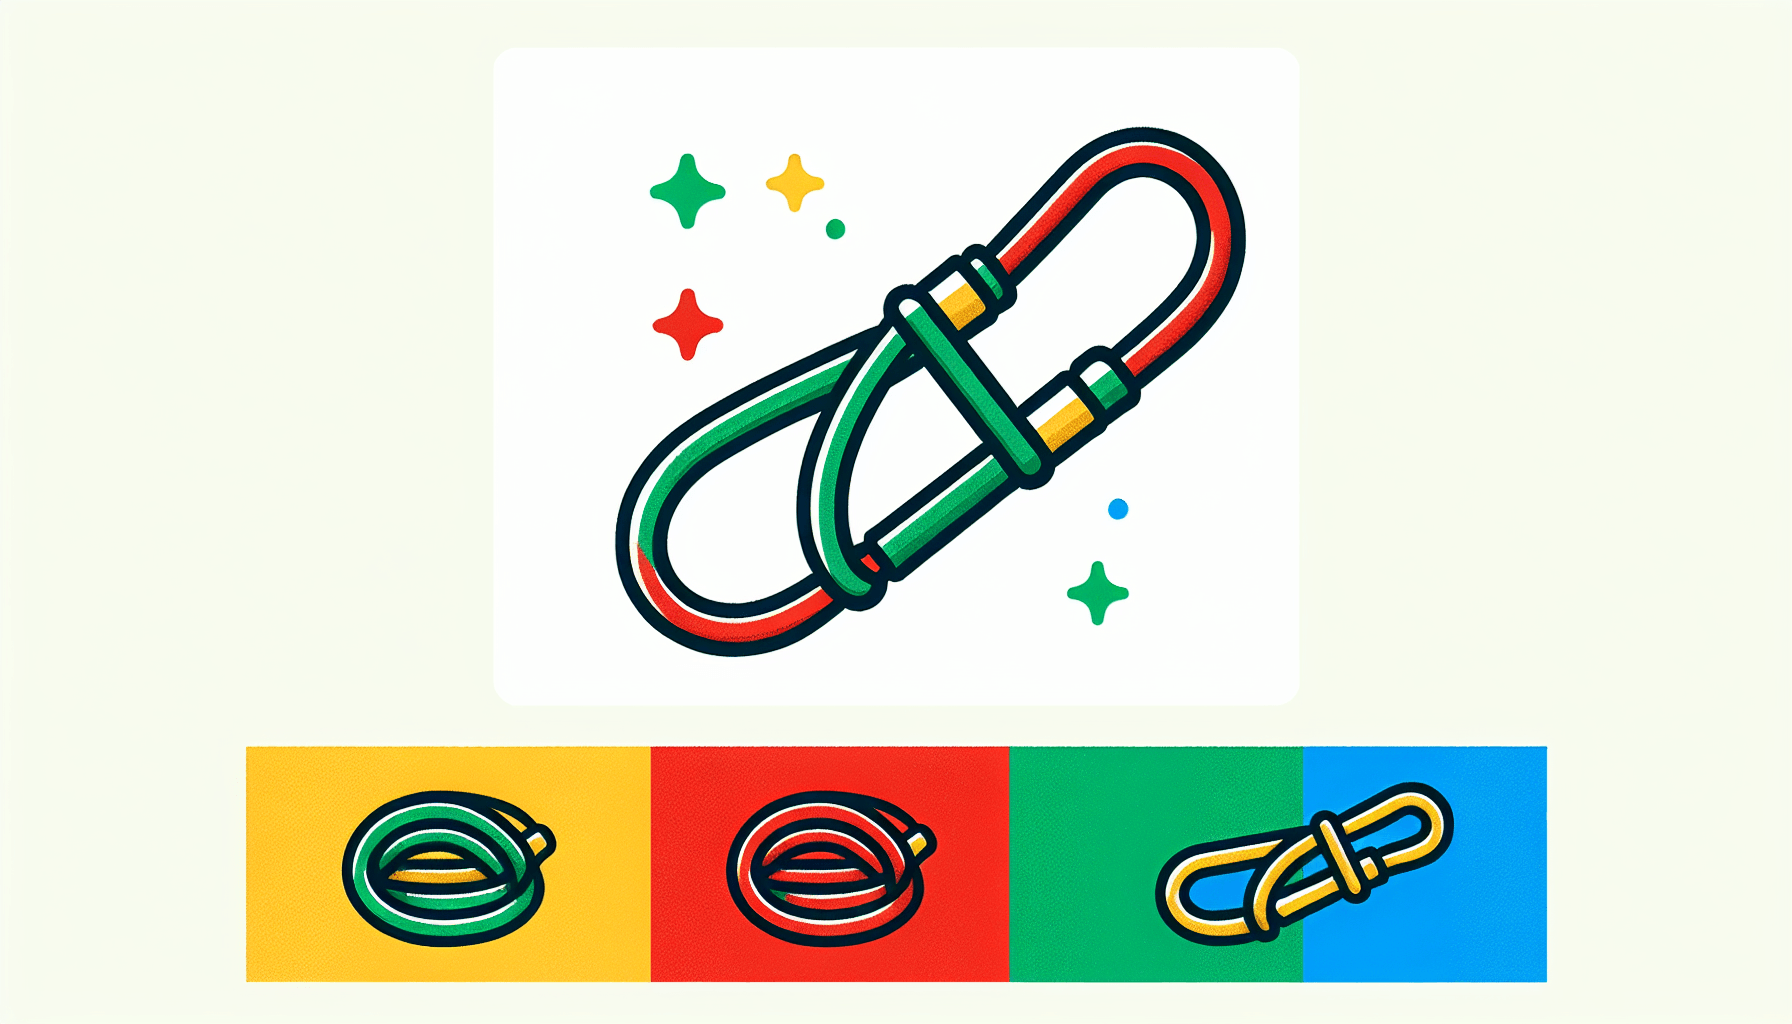 Bungee cord in flat illustration style and white background, red #f47574, green #88c7a8, yellow #fcc44b, and blue #645bc8 colors.